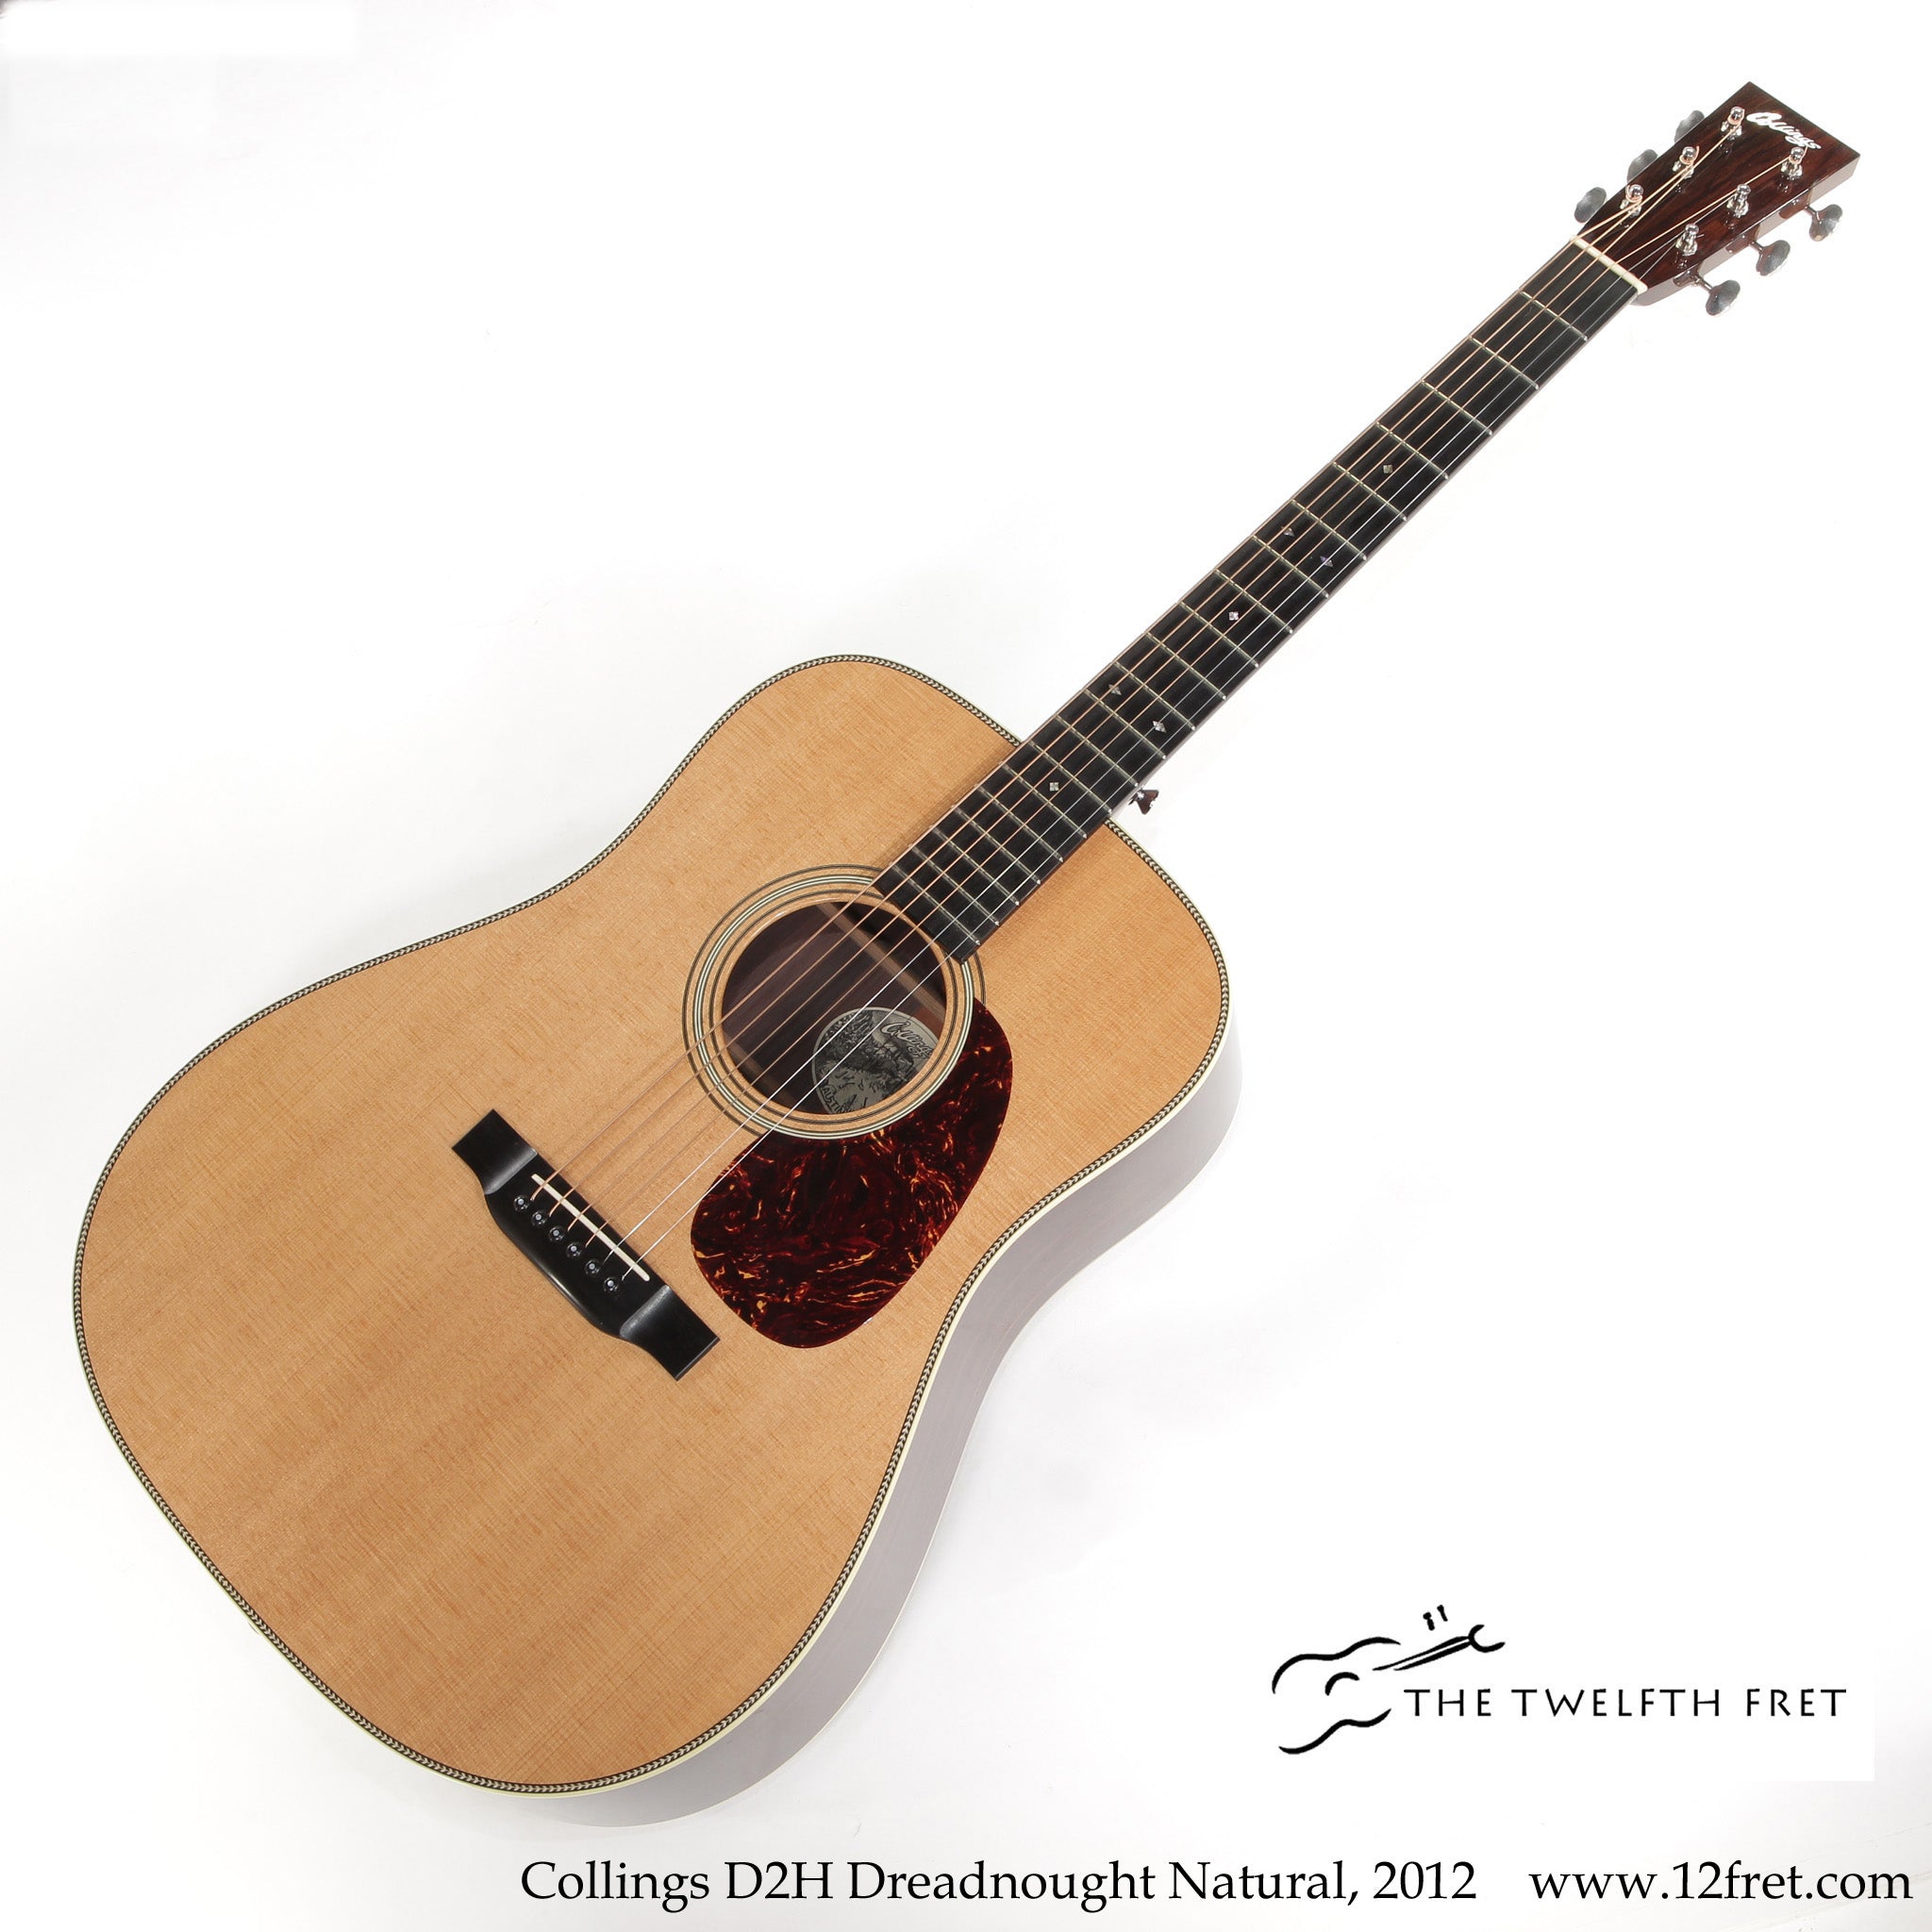 Collings D2H Dreadnought Natural, 2012